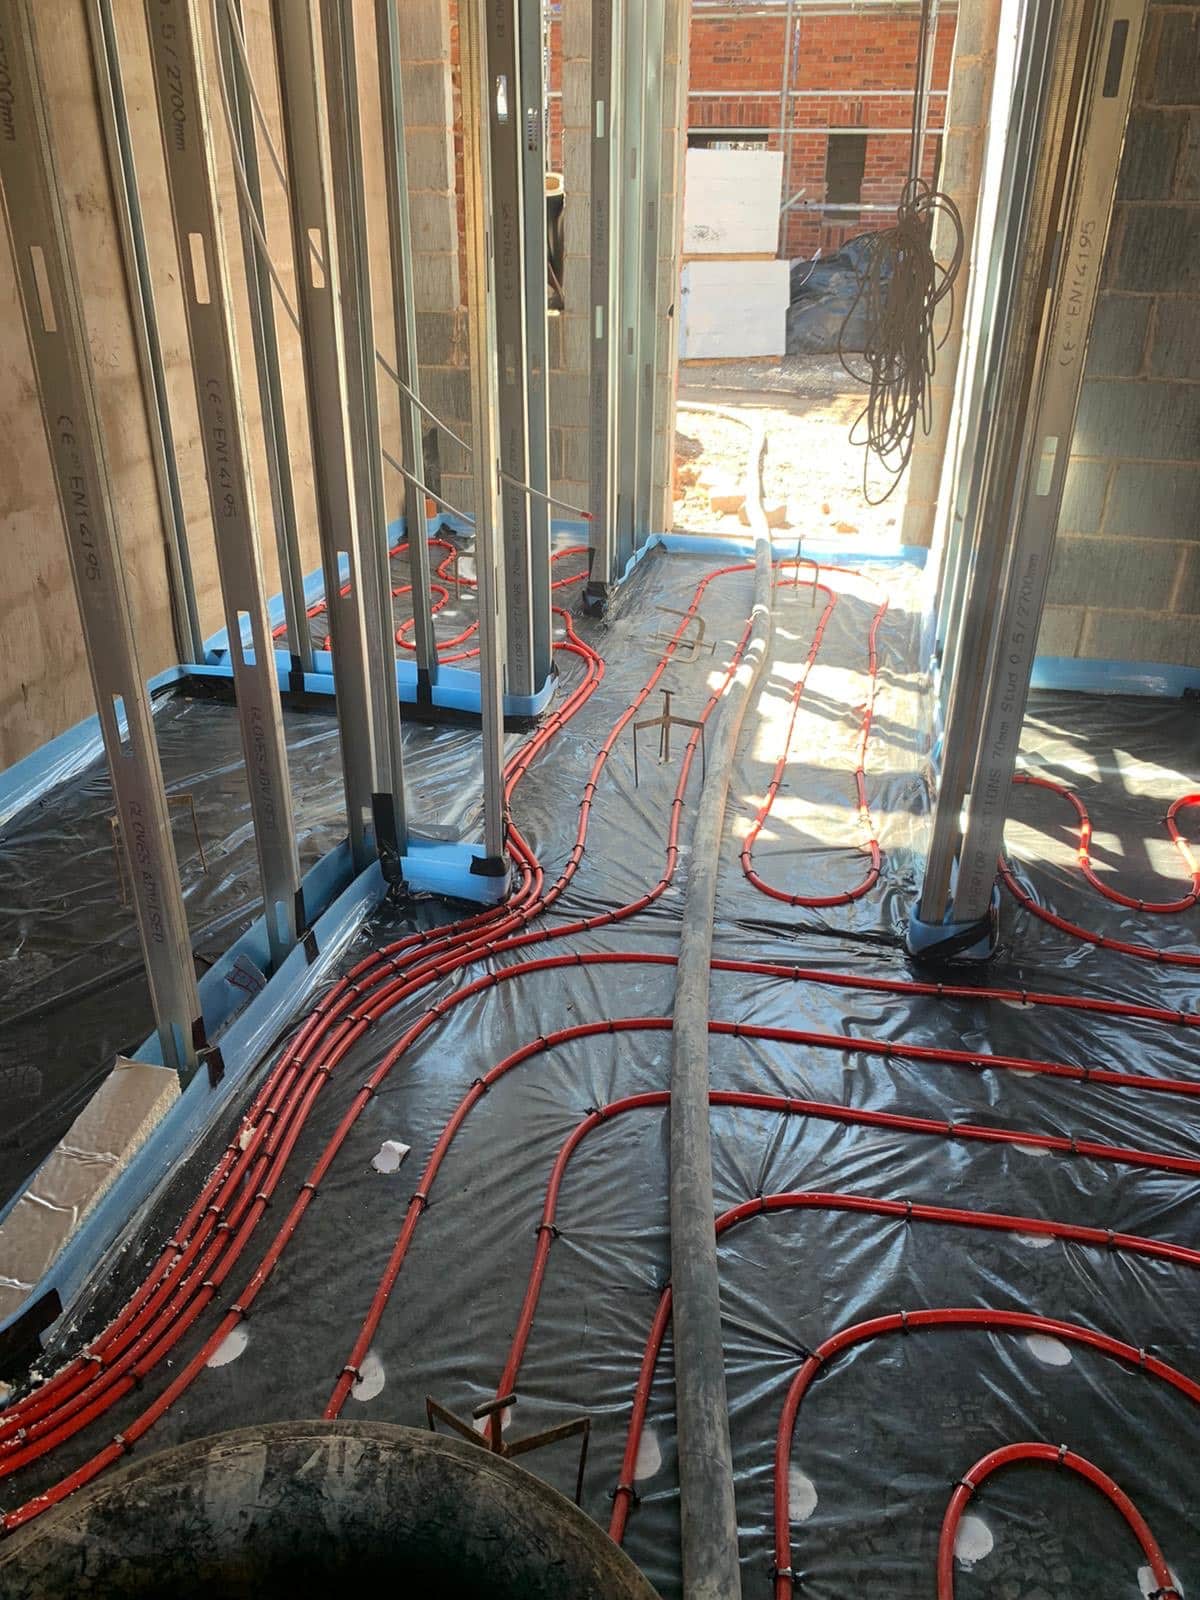 Underfloor Heating Installation complete, doorway to a new build home previous to concrete liquid